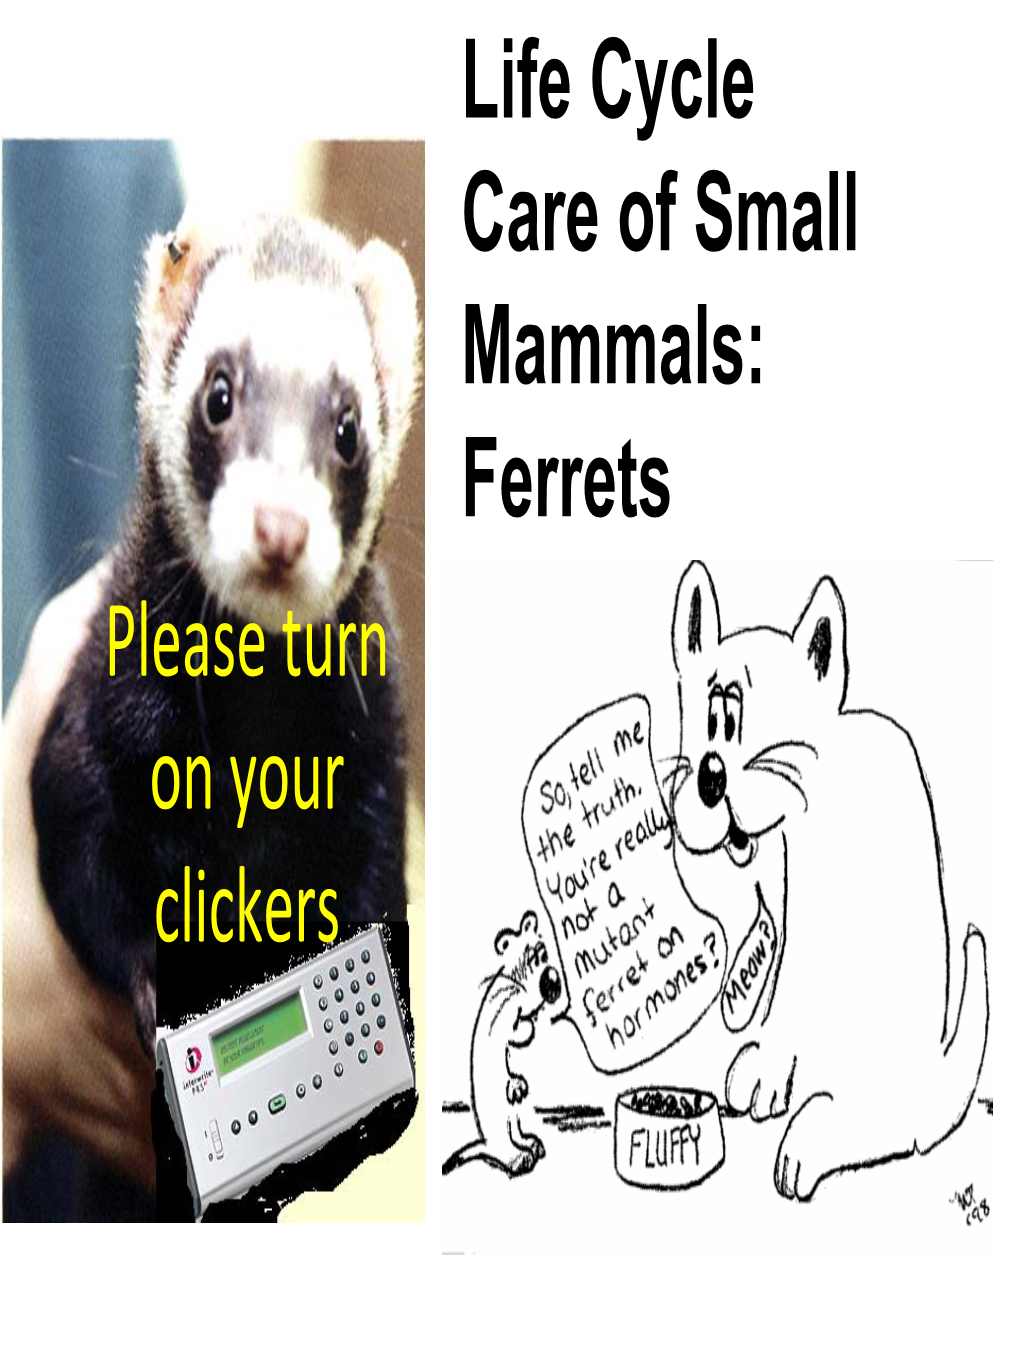 Life Cycle Care of Small Mammals: Ferrets Please Turn on Your Clickers Ferrets Are in the Weasel Family (Mustelids)